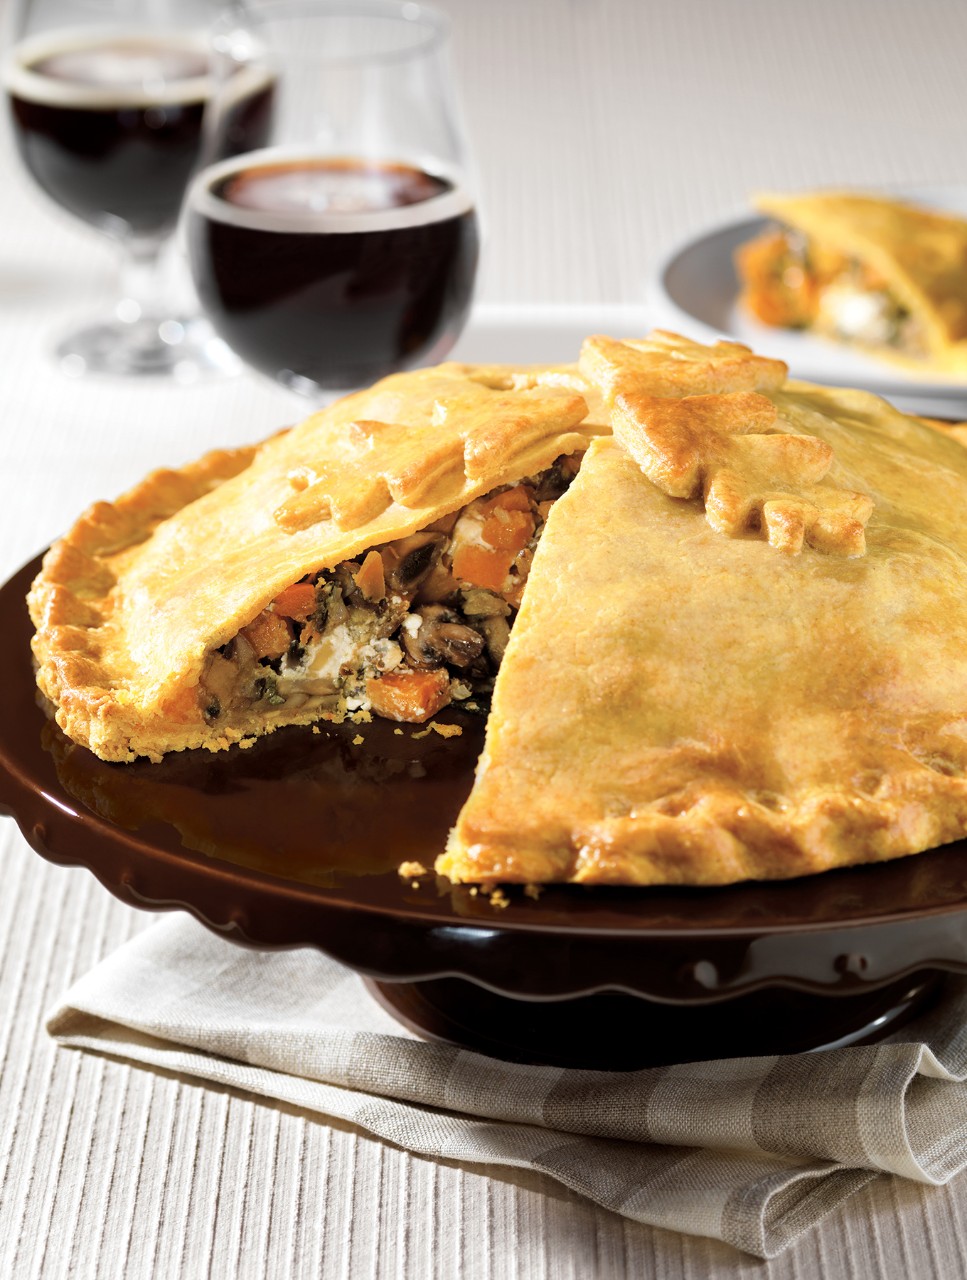 Roasted Butternut Squash and Mushroom Pie with Cheddar Pastry